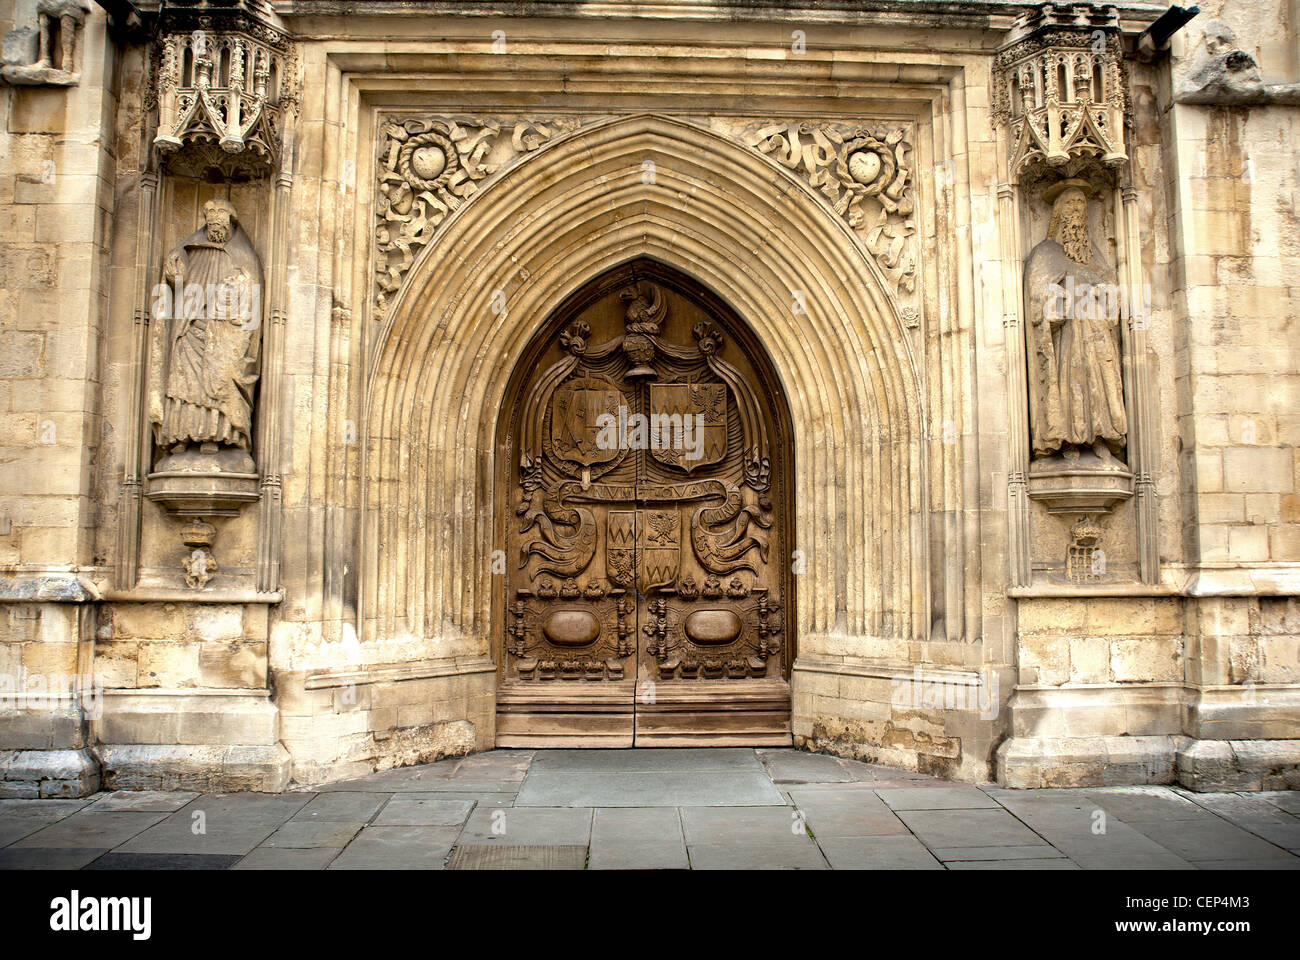 Doors of Bath Cathedral in Bath, England Stock Photo